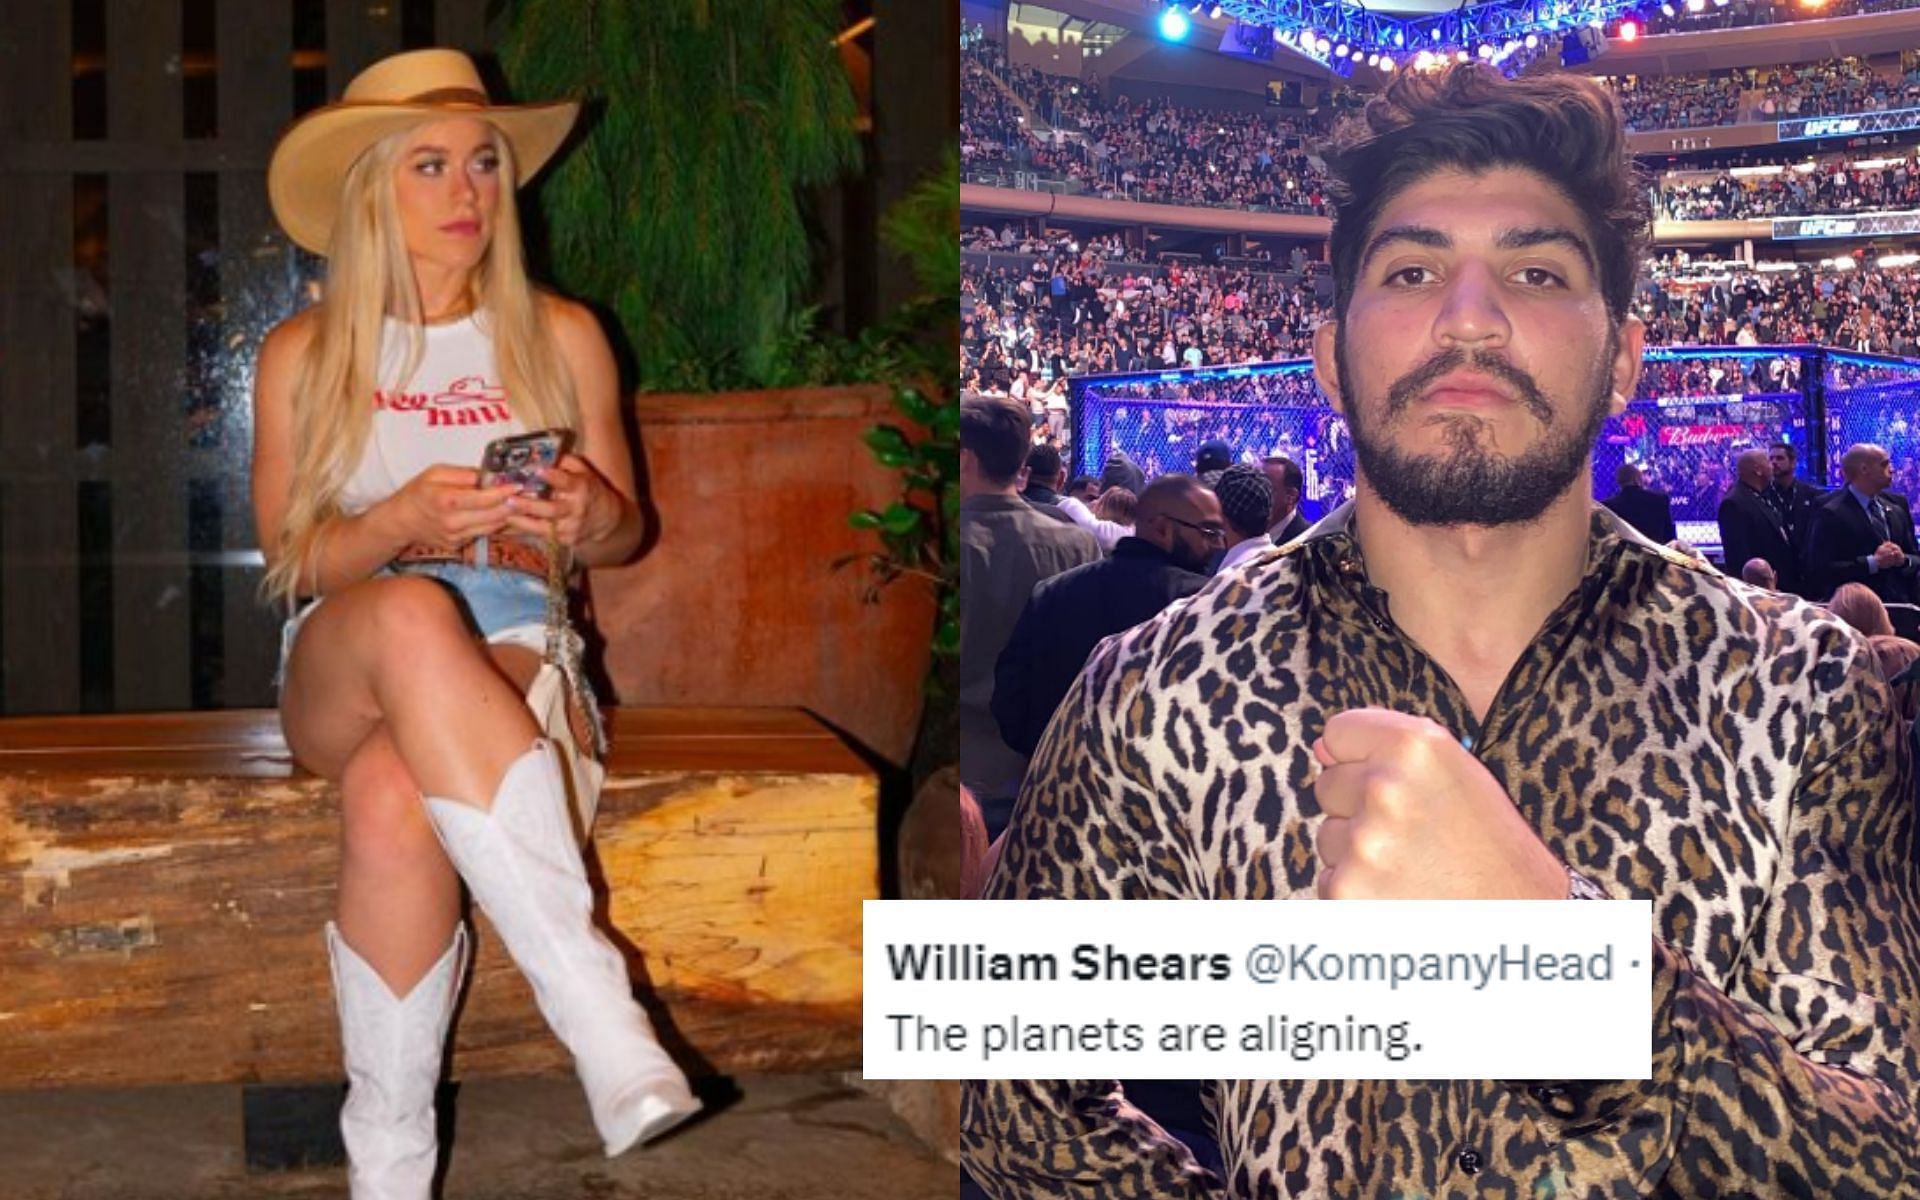 Of Boxing Star Elle Brooke Proposes S X Tape With Dillon Danis In Hilarious Social Media